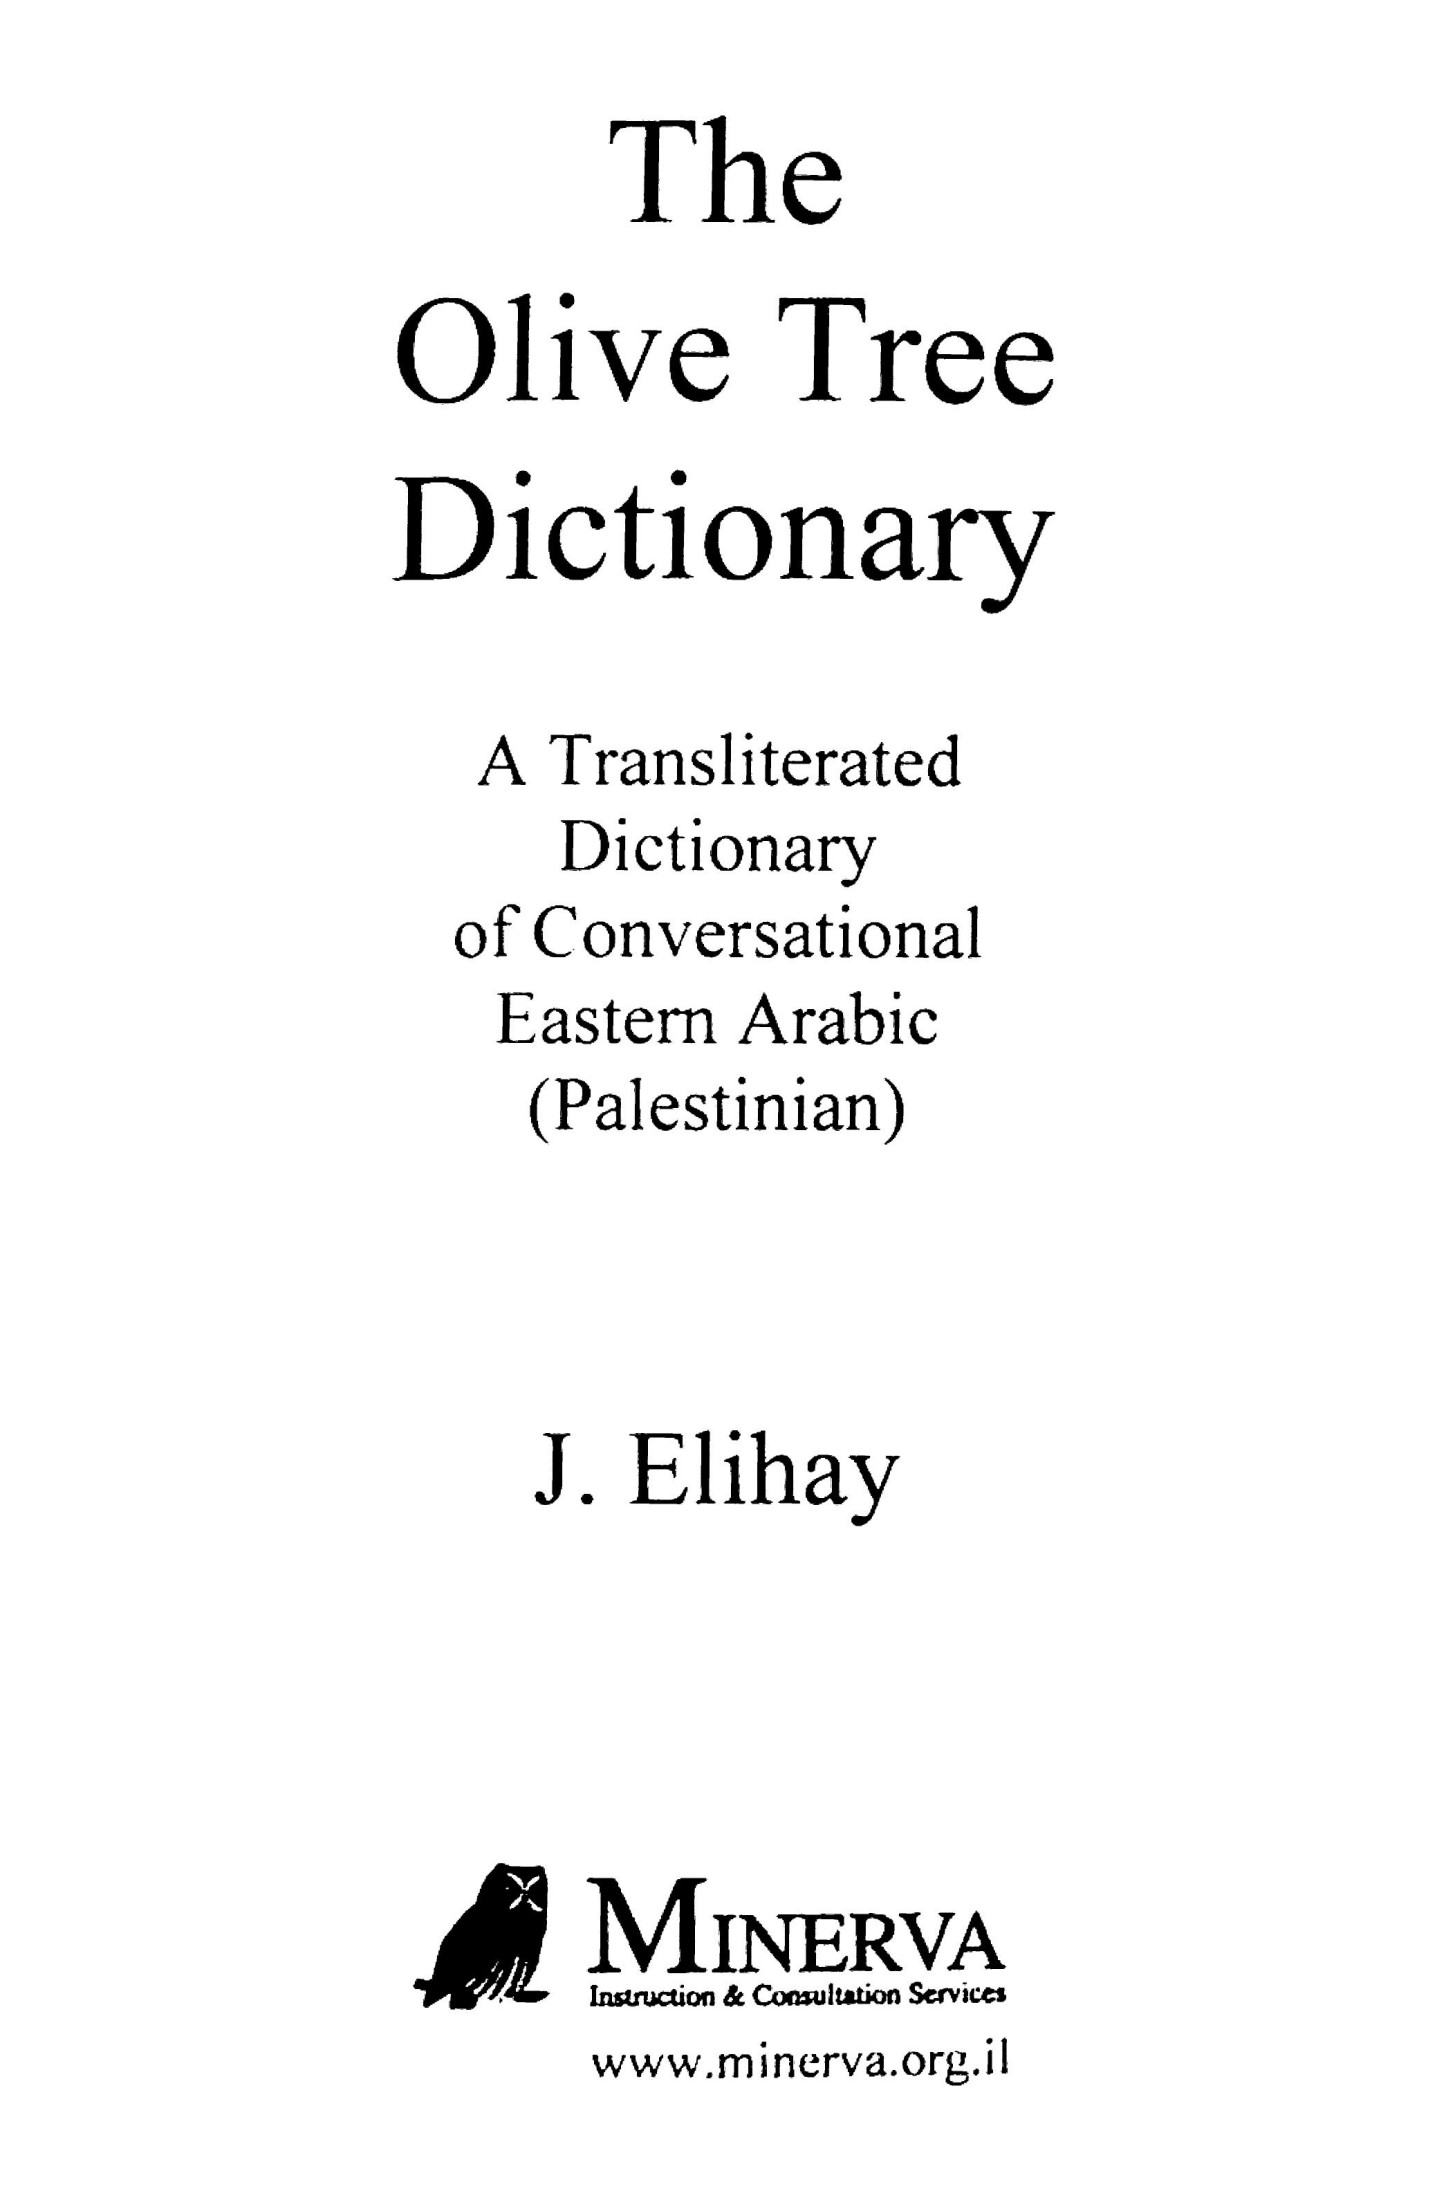 The Olive Tree Dictionary  A Transliterated Dictionary of Conversational Eastern Arabic (Palestinian) ( PDFDrive )